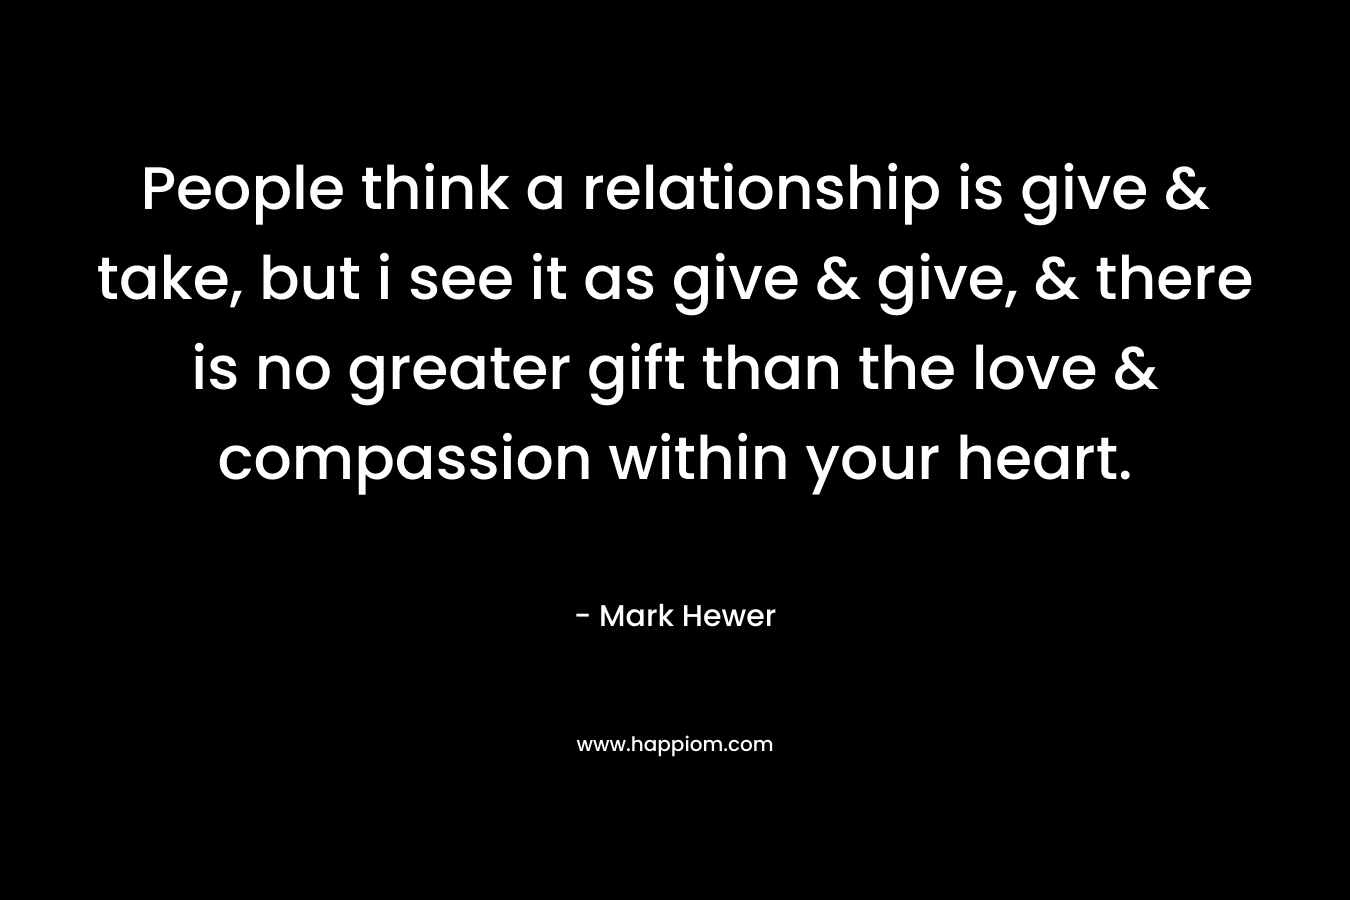 People think a relationship is give & take, but i see it as give & give, & there is no greater gift than the love & compassion within your heart. – Mark Hewer